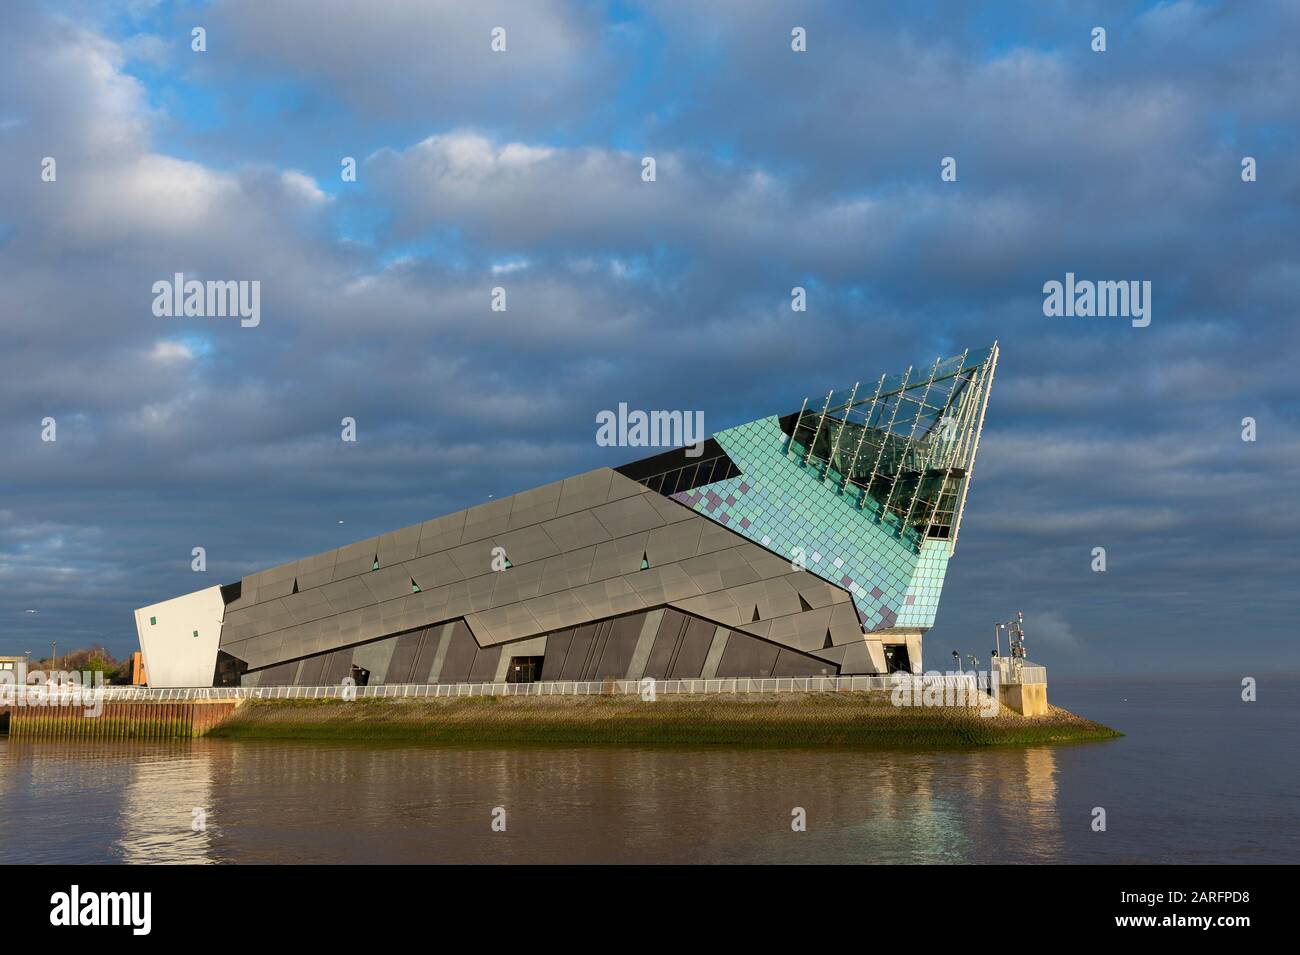 Shown is The Deep Aquarium in Kingston Upon Hull. Hull's award-winning tourist attraction with 5,000 animals shown against a cloudy sky on The Humber Stock Photo